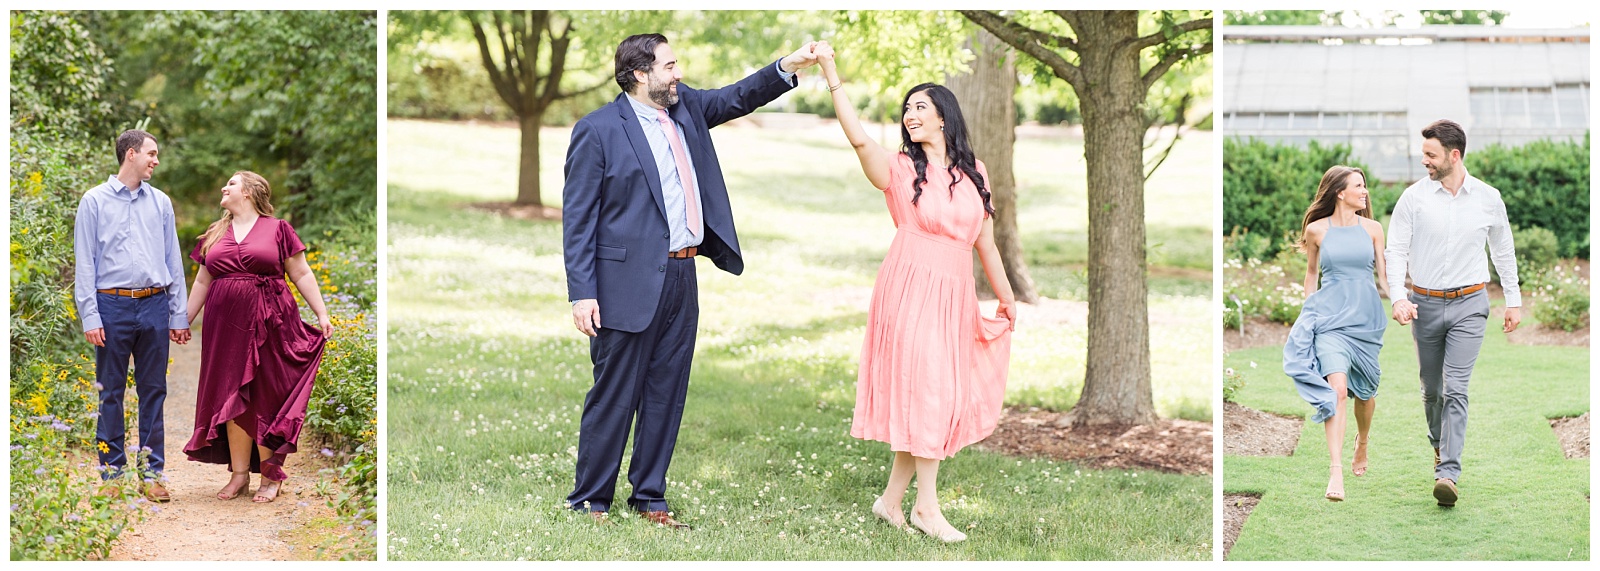 engagement session outfits with long flowy dresses and fabrics that move, spin, and twirl